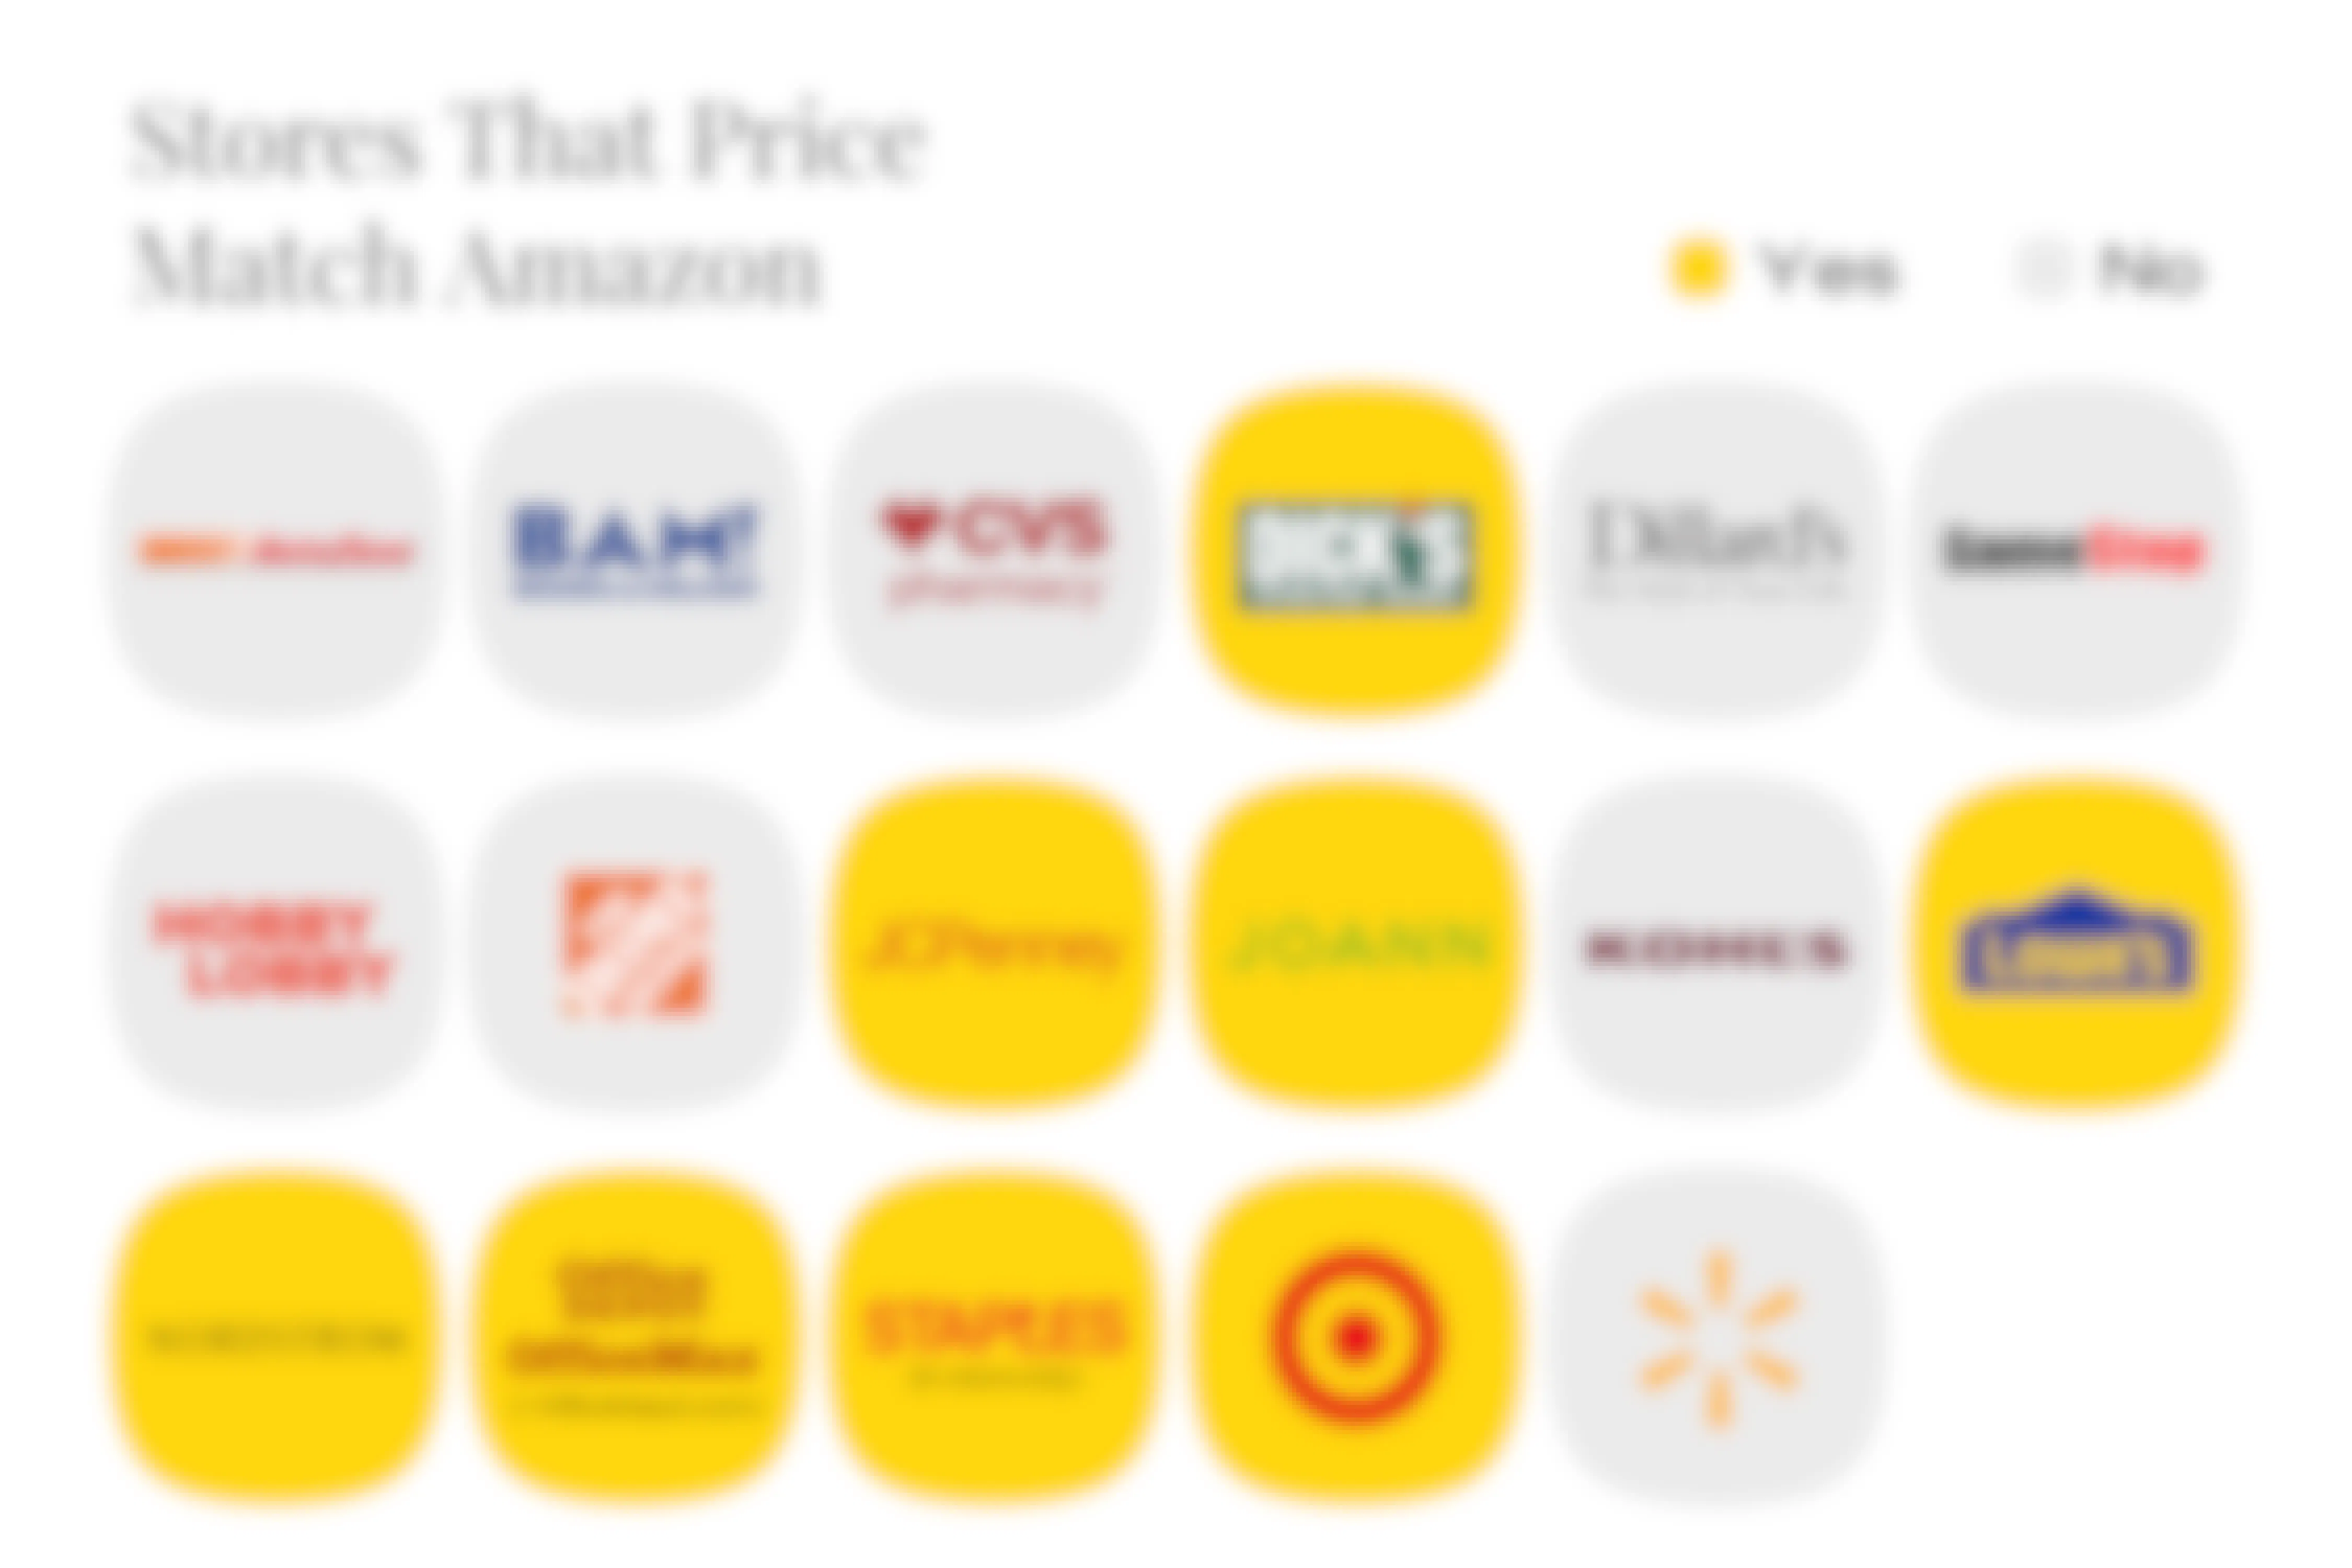 a graphic showing stores that price-match amazon in yellow and those that do not price match Amazon in grey